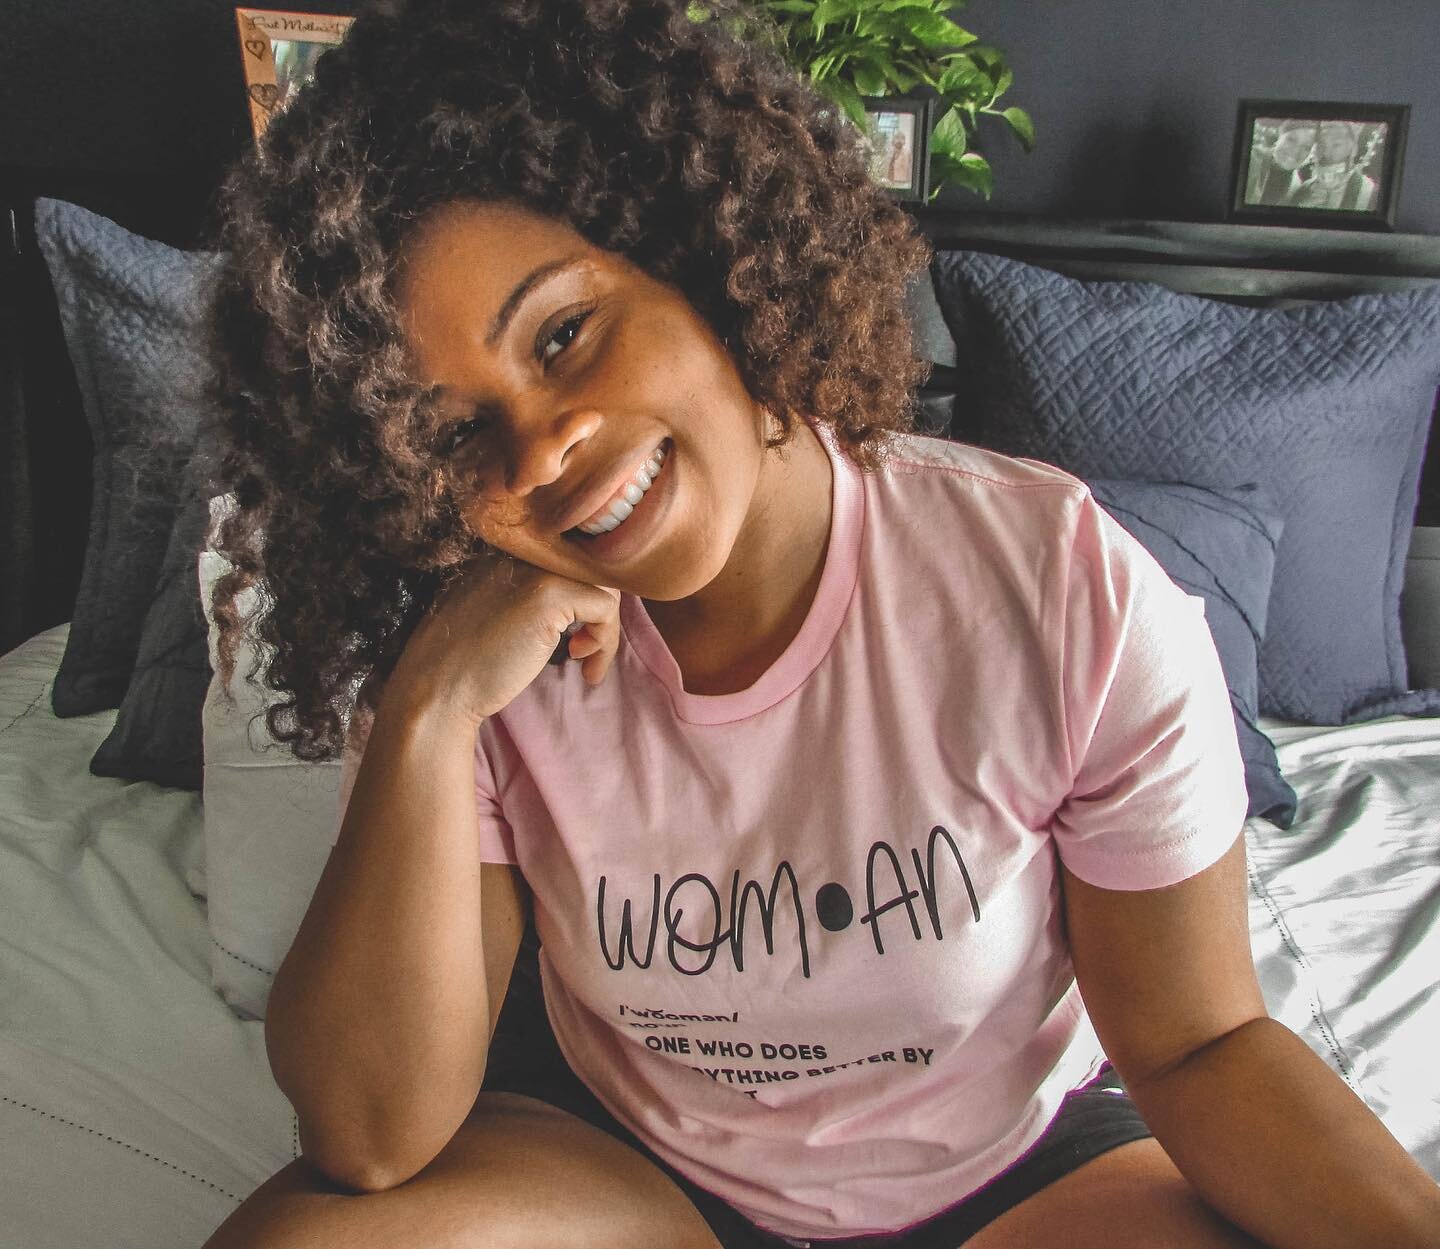 Have you ordered your Women&rsquo;s HERstory month Truth Wear? Just click the link in my bio and order yours today! Only a few left in stock. Use code THANKYOU25 for 25% off your order today!

#woman #womanownedbusiness #women #womenshistorymonth #bl